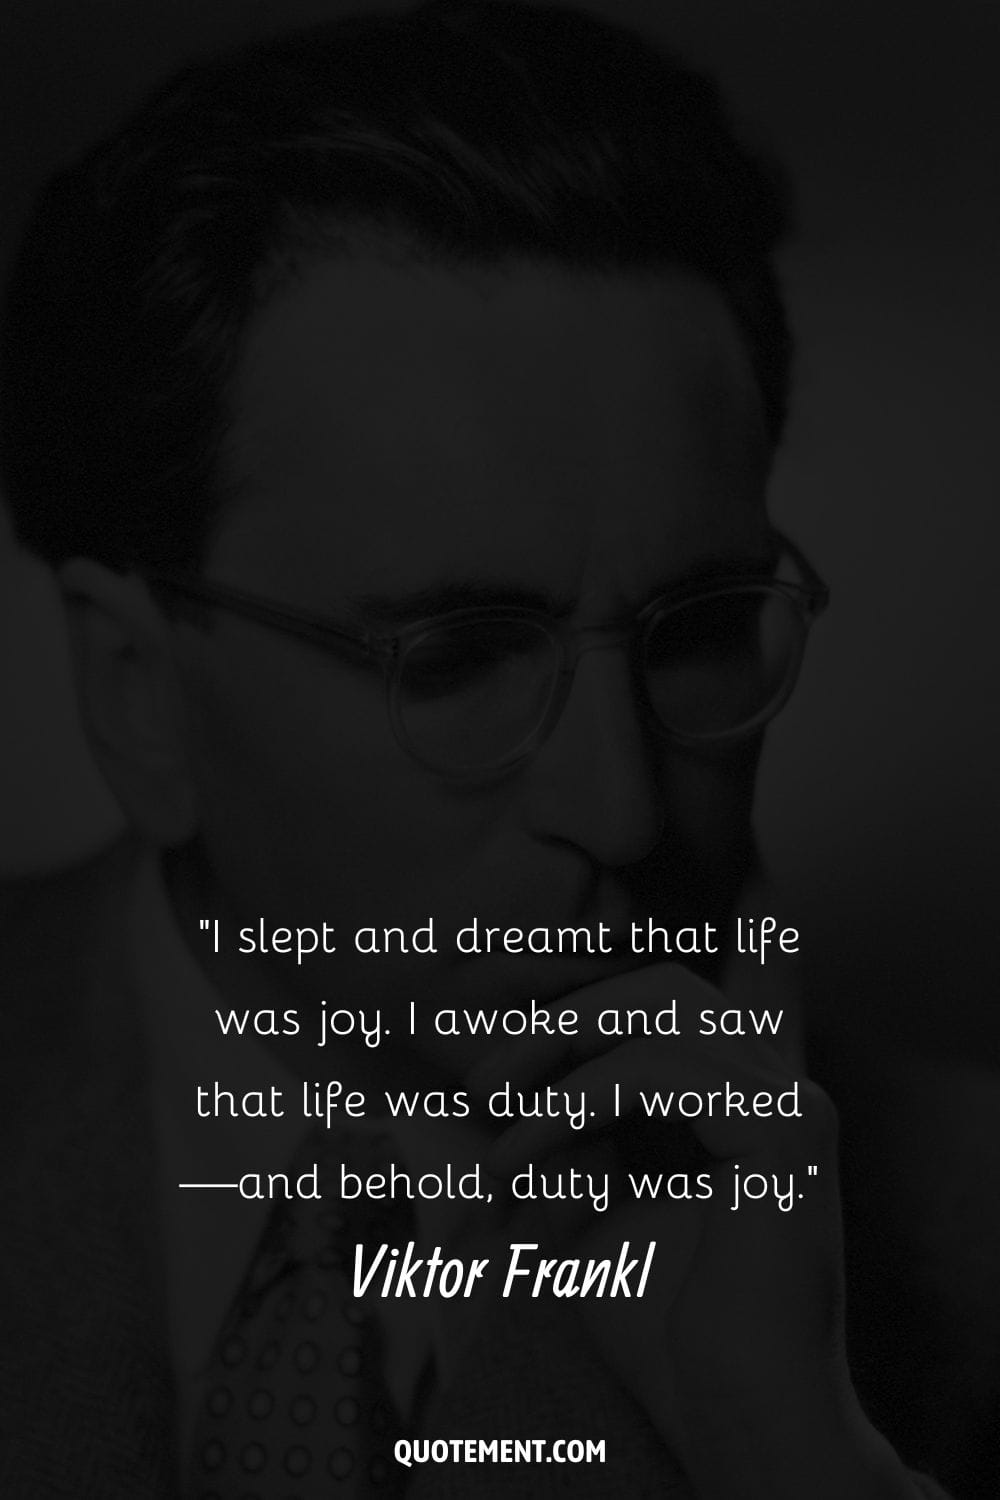 Image of Viktor Frankl representing his quote on joy.